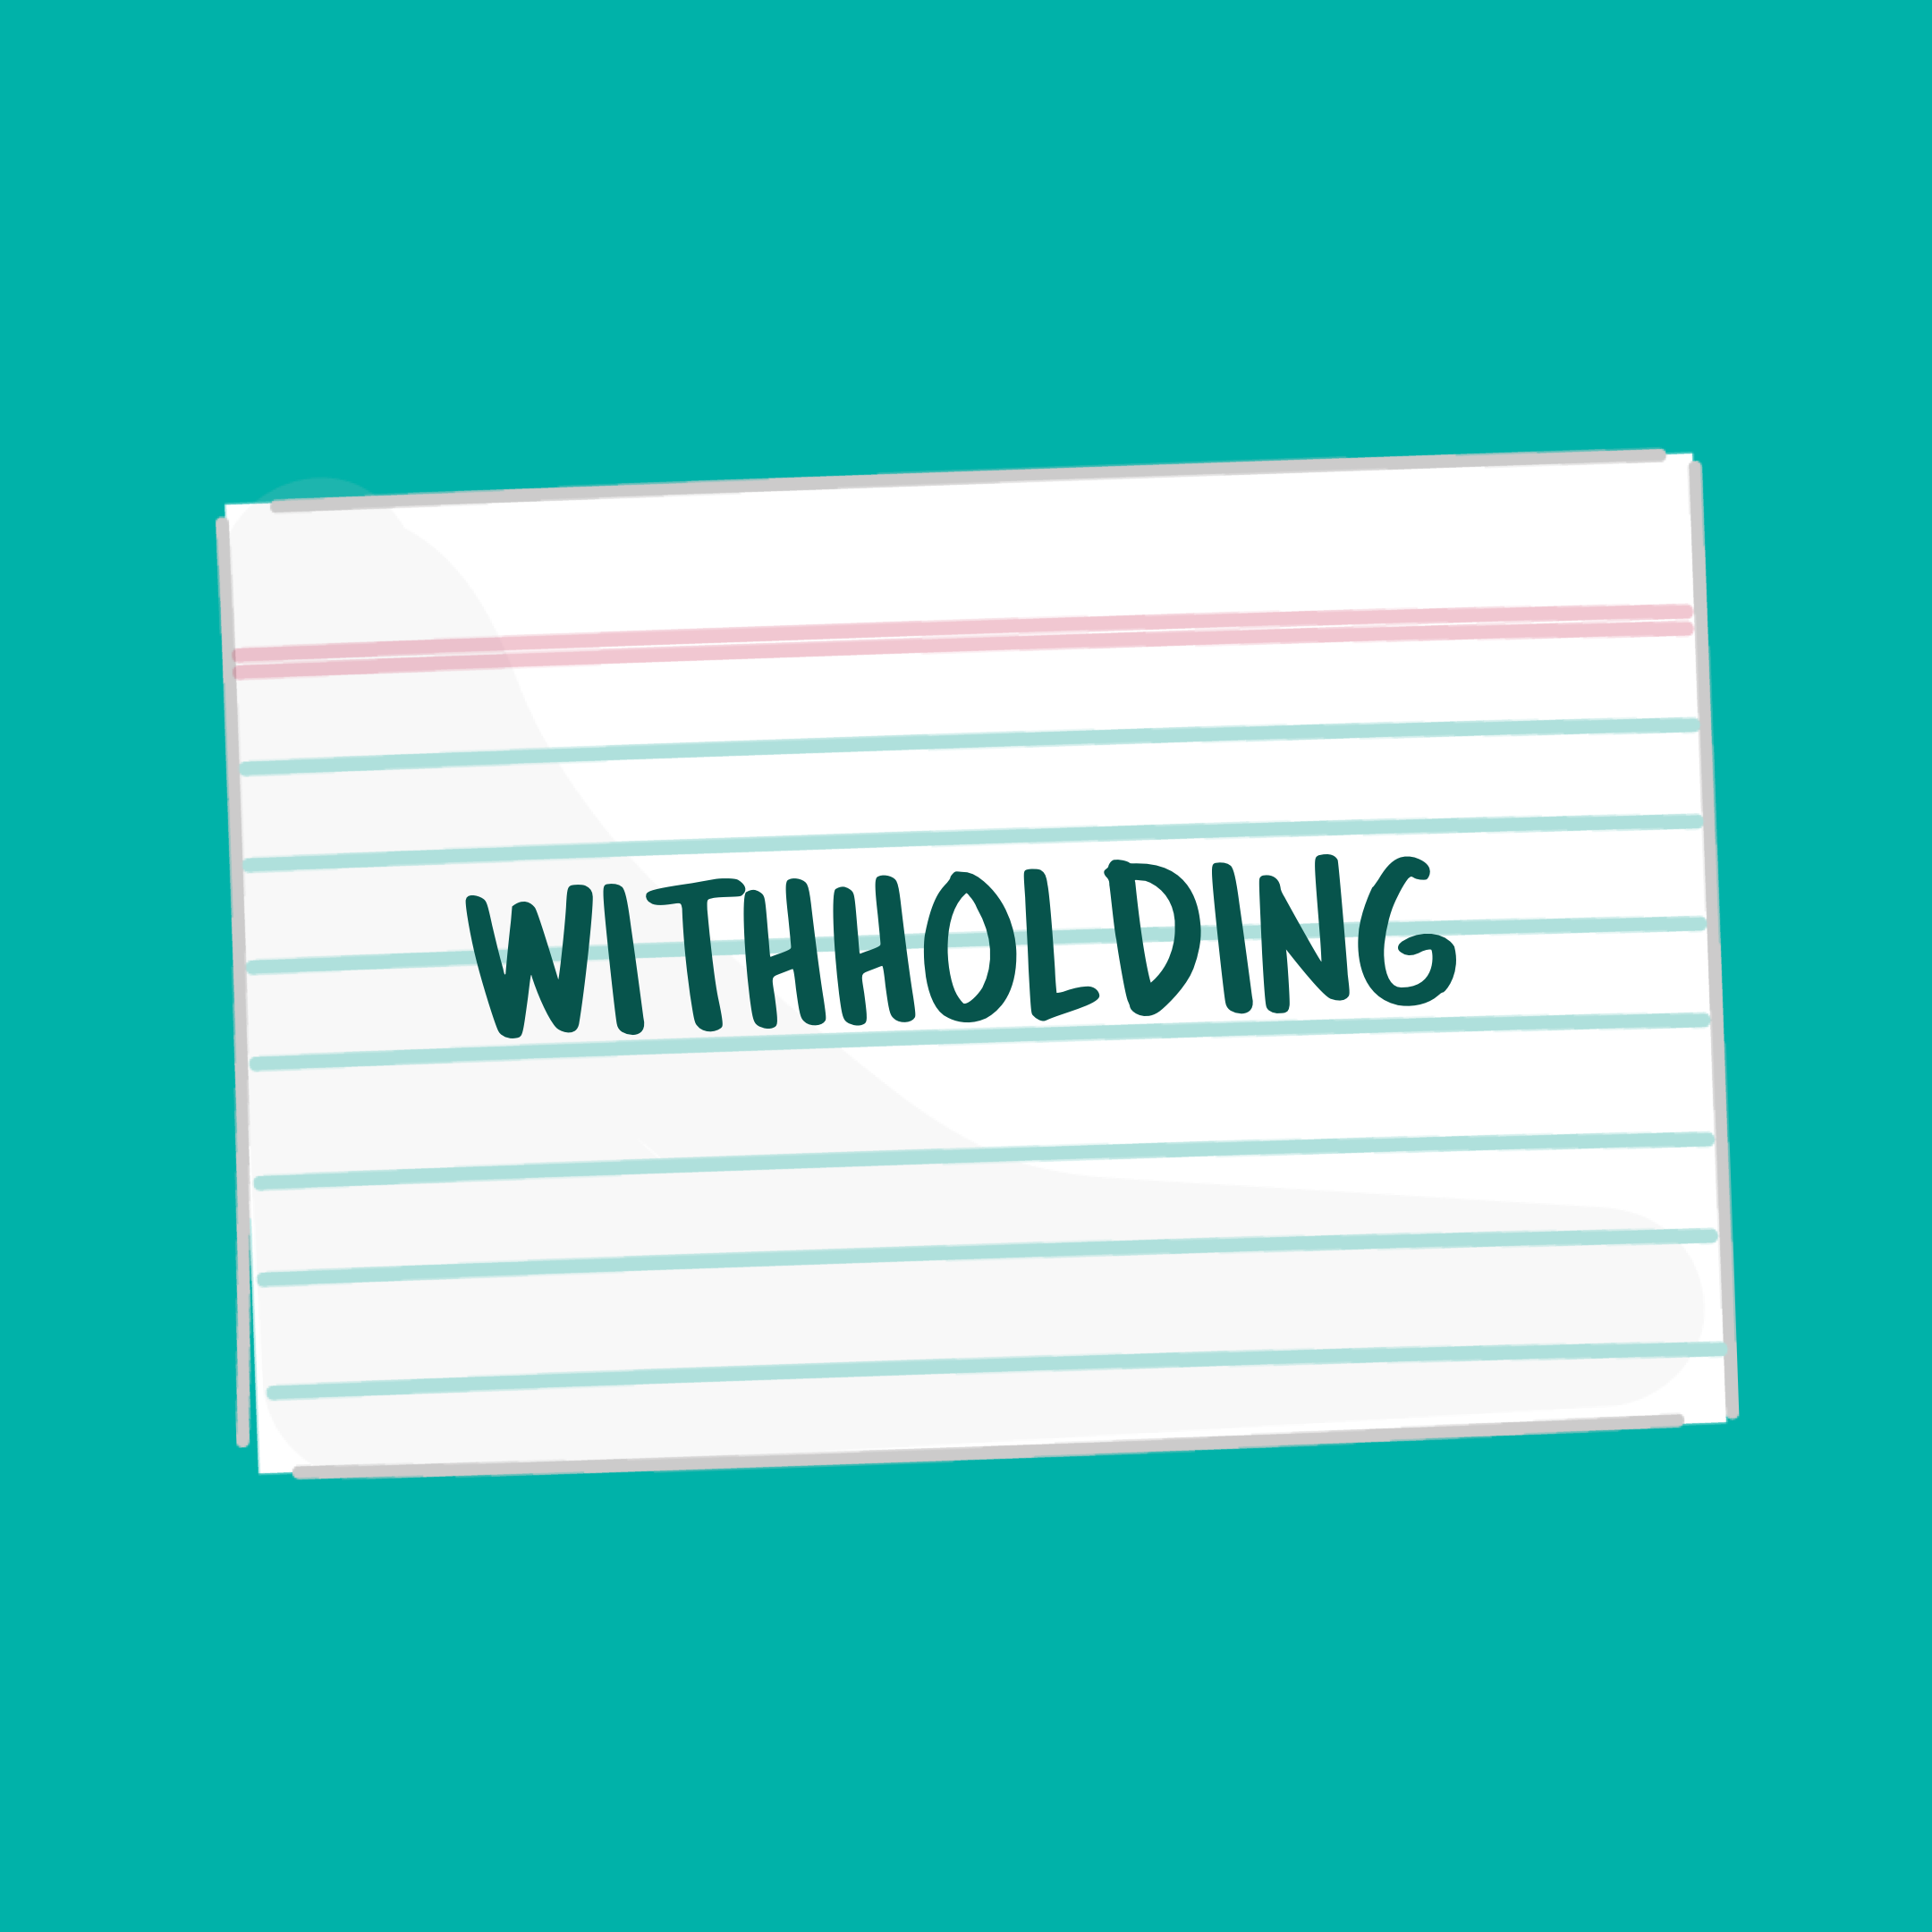 Withholding FSL card